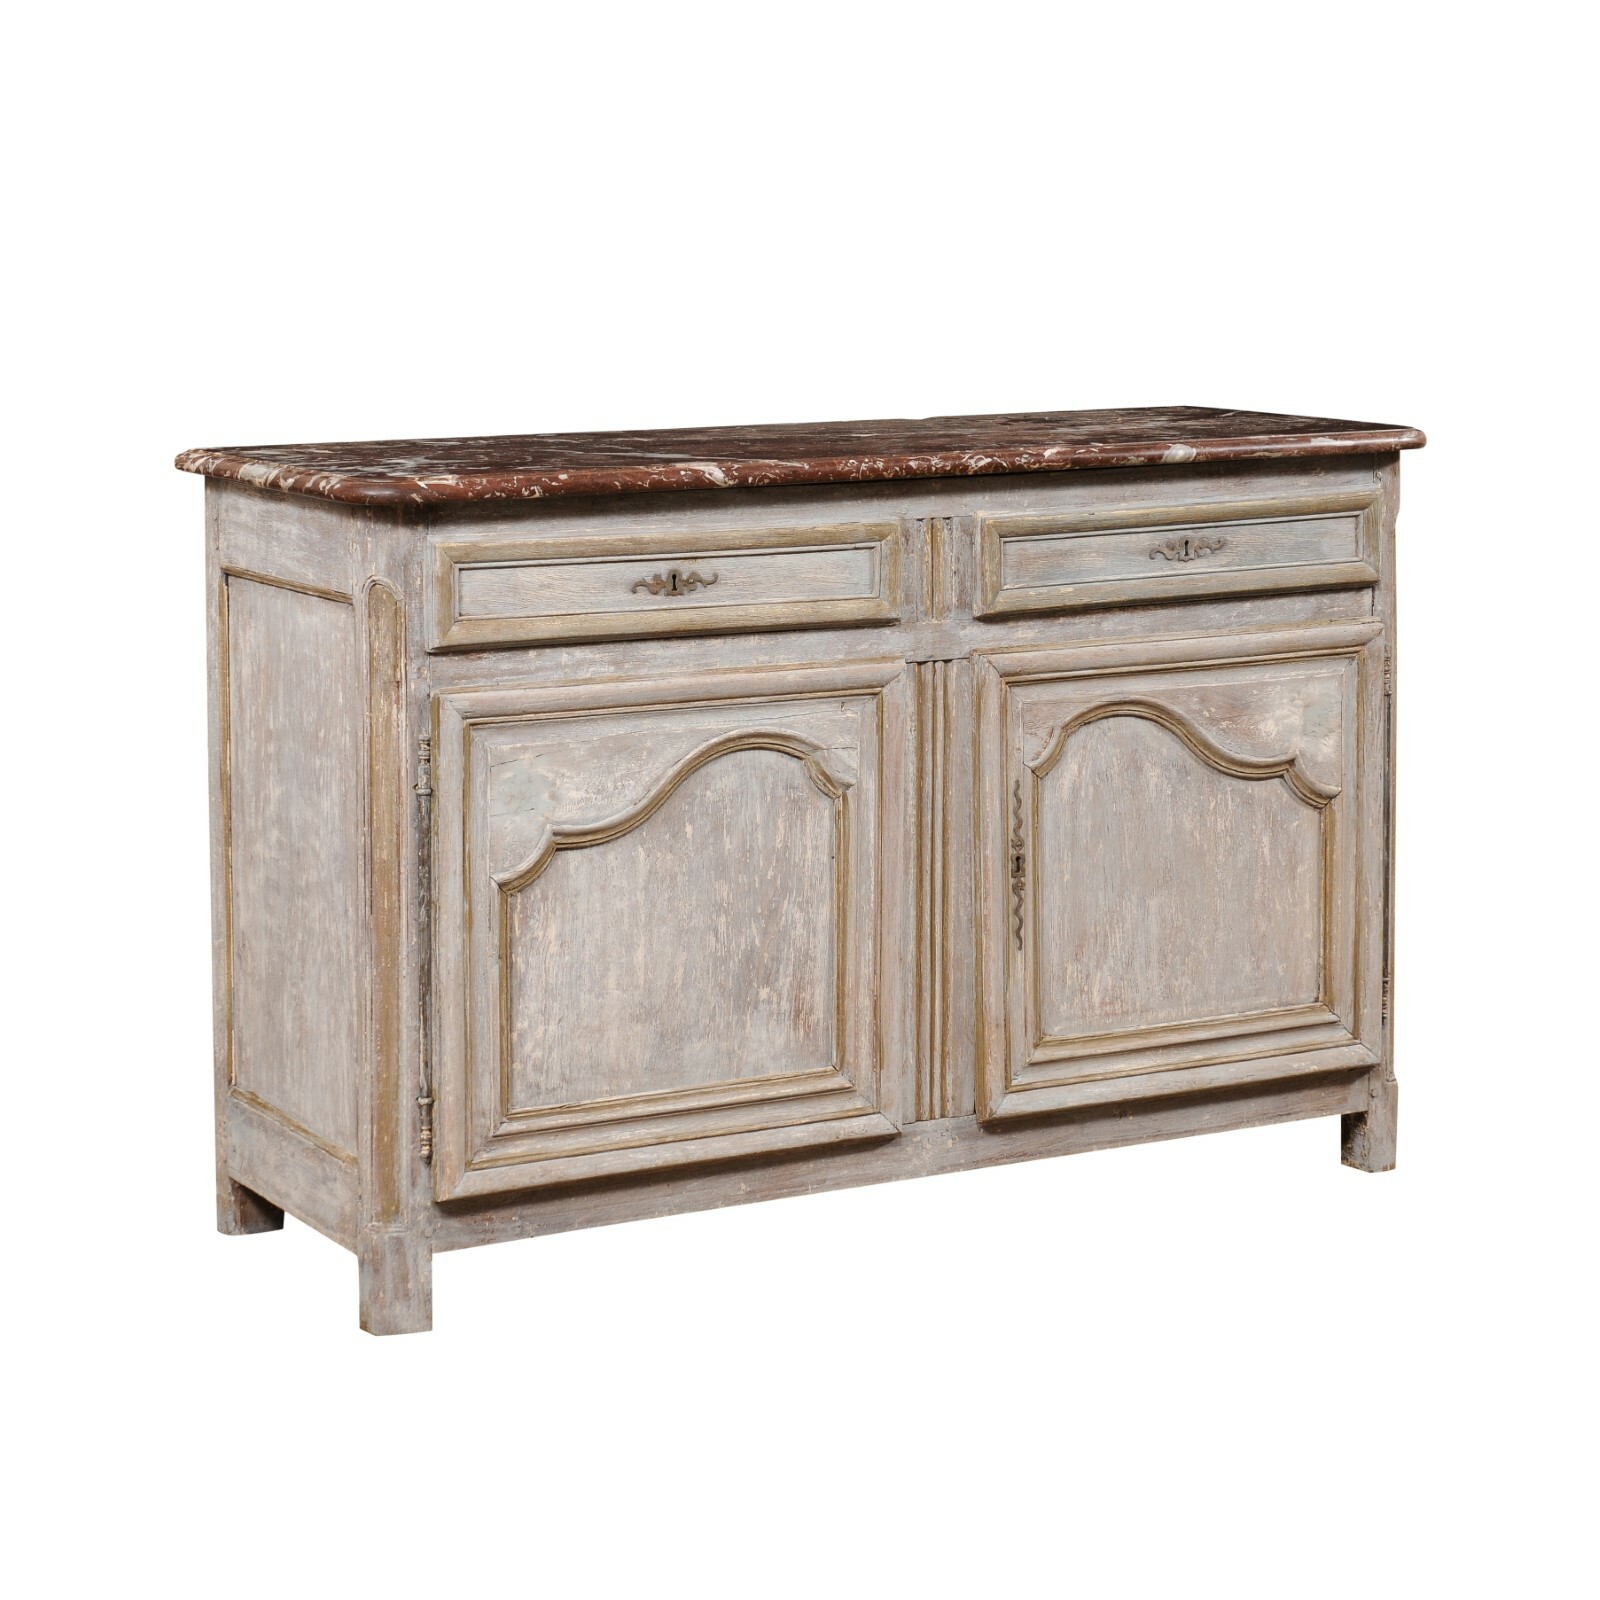 French Marble Top Painted Buffet, 19th C.